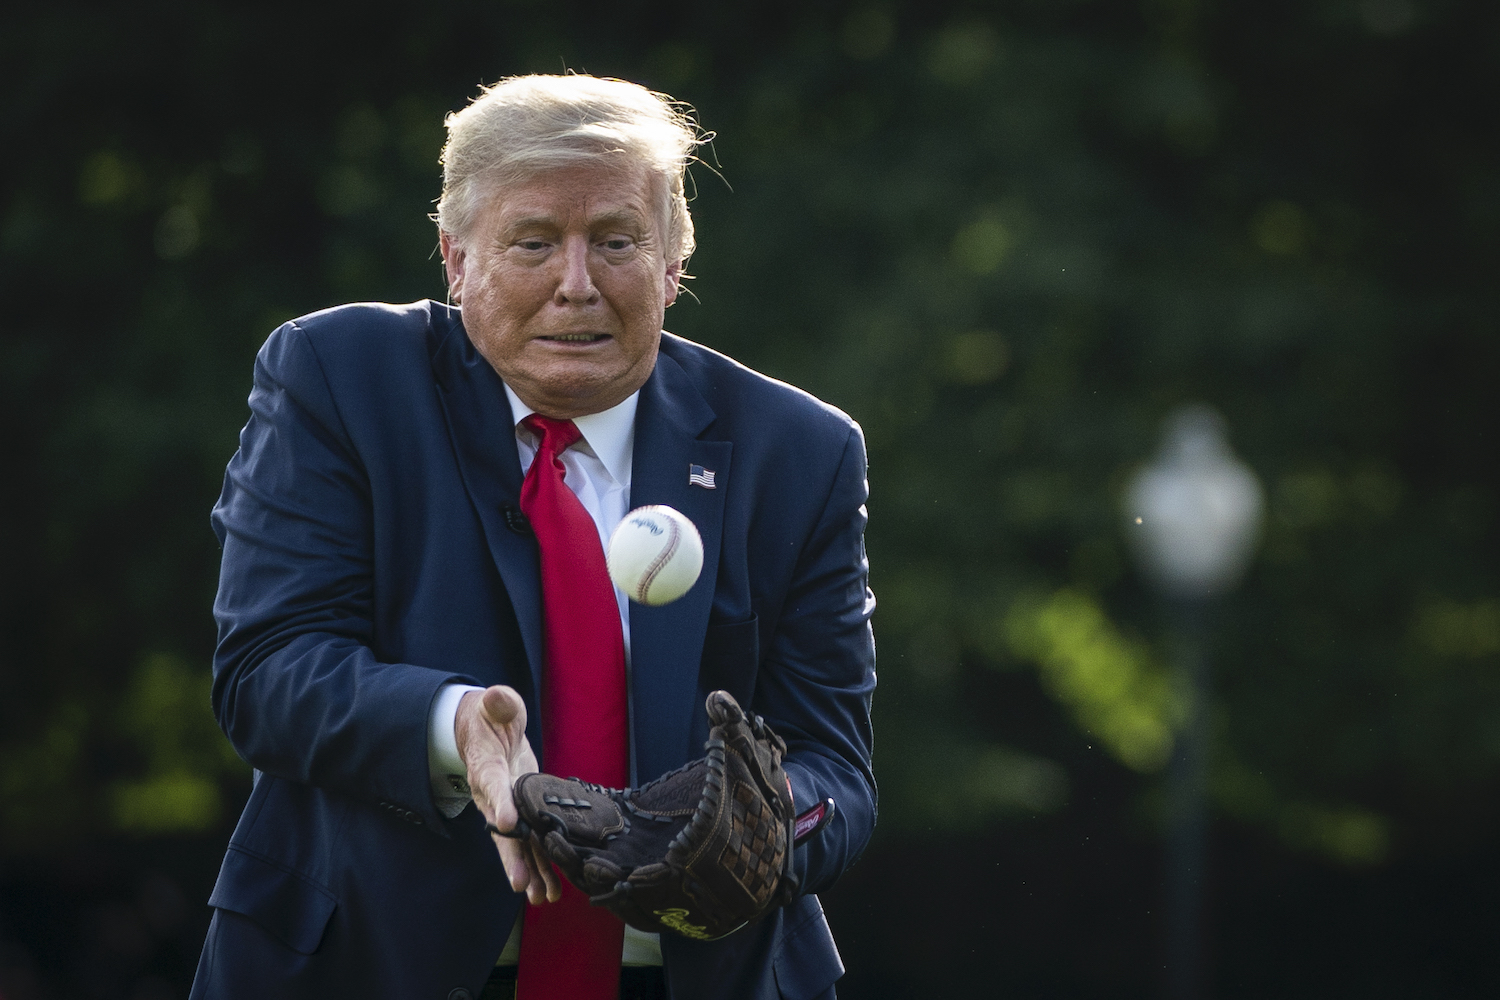 The Embarrassing Reasons President Trump Backed Out of Throwing First Pitch at Yankees Stadium